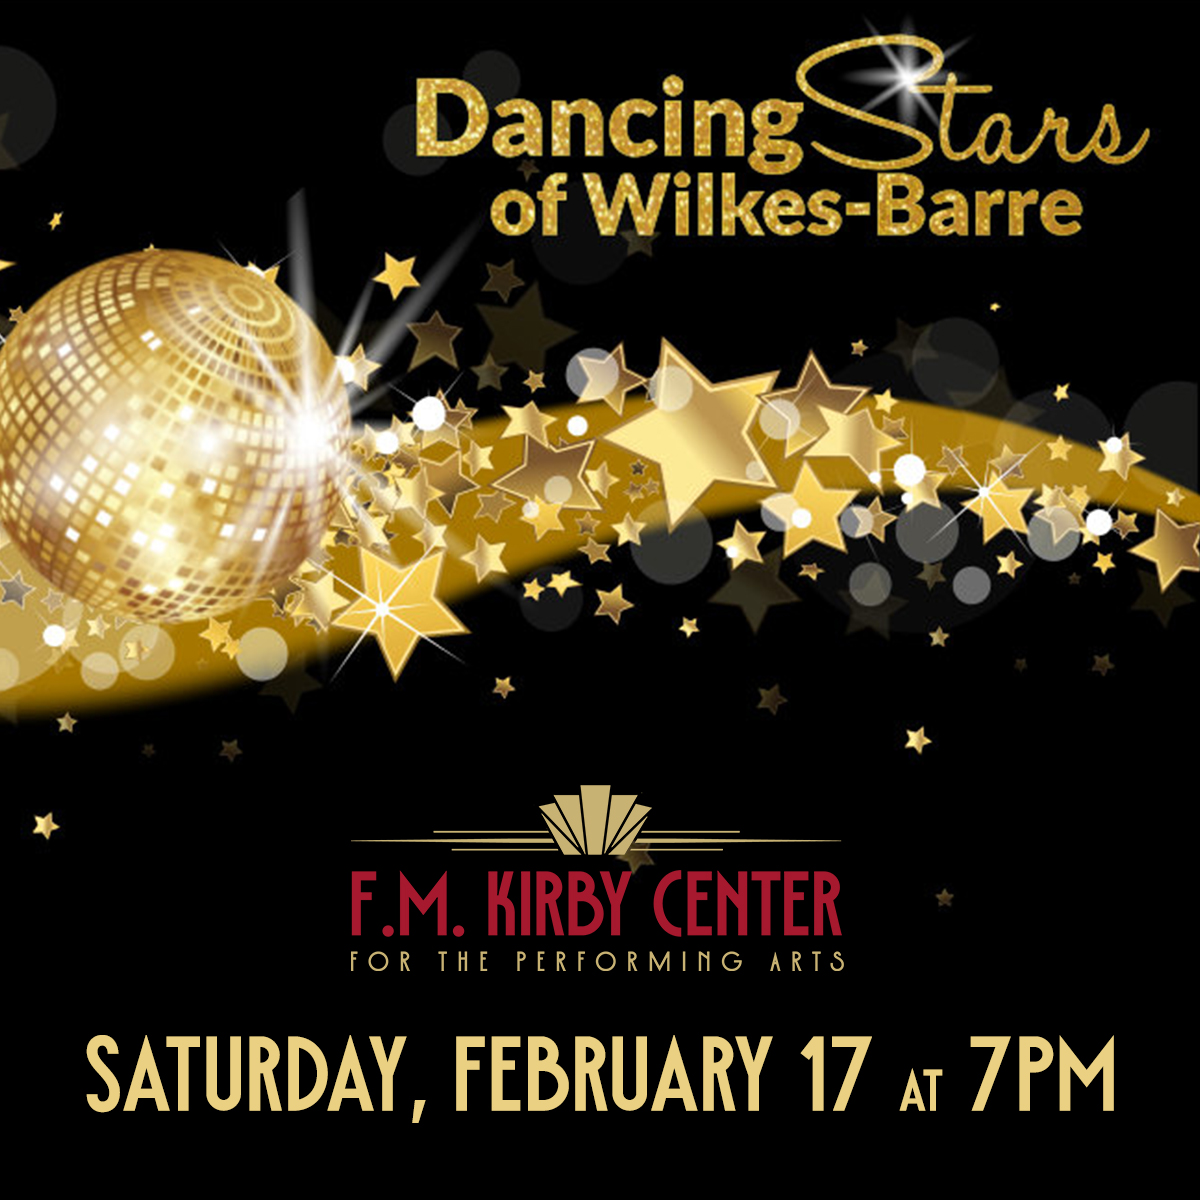 Dancing Stars of Wilkes-Barre - Saturday, February 17 at 7pm